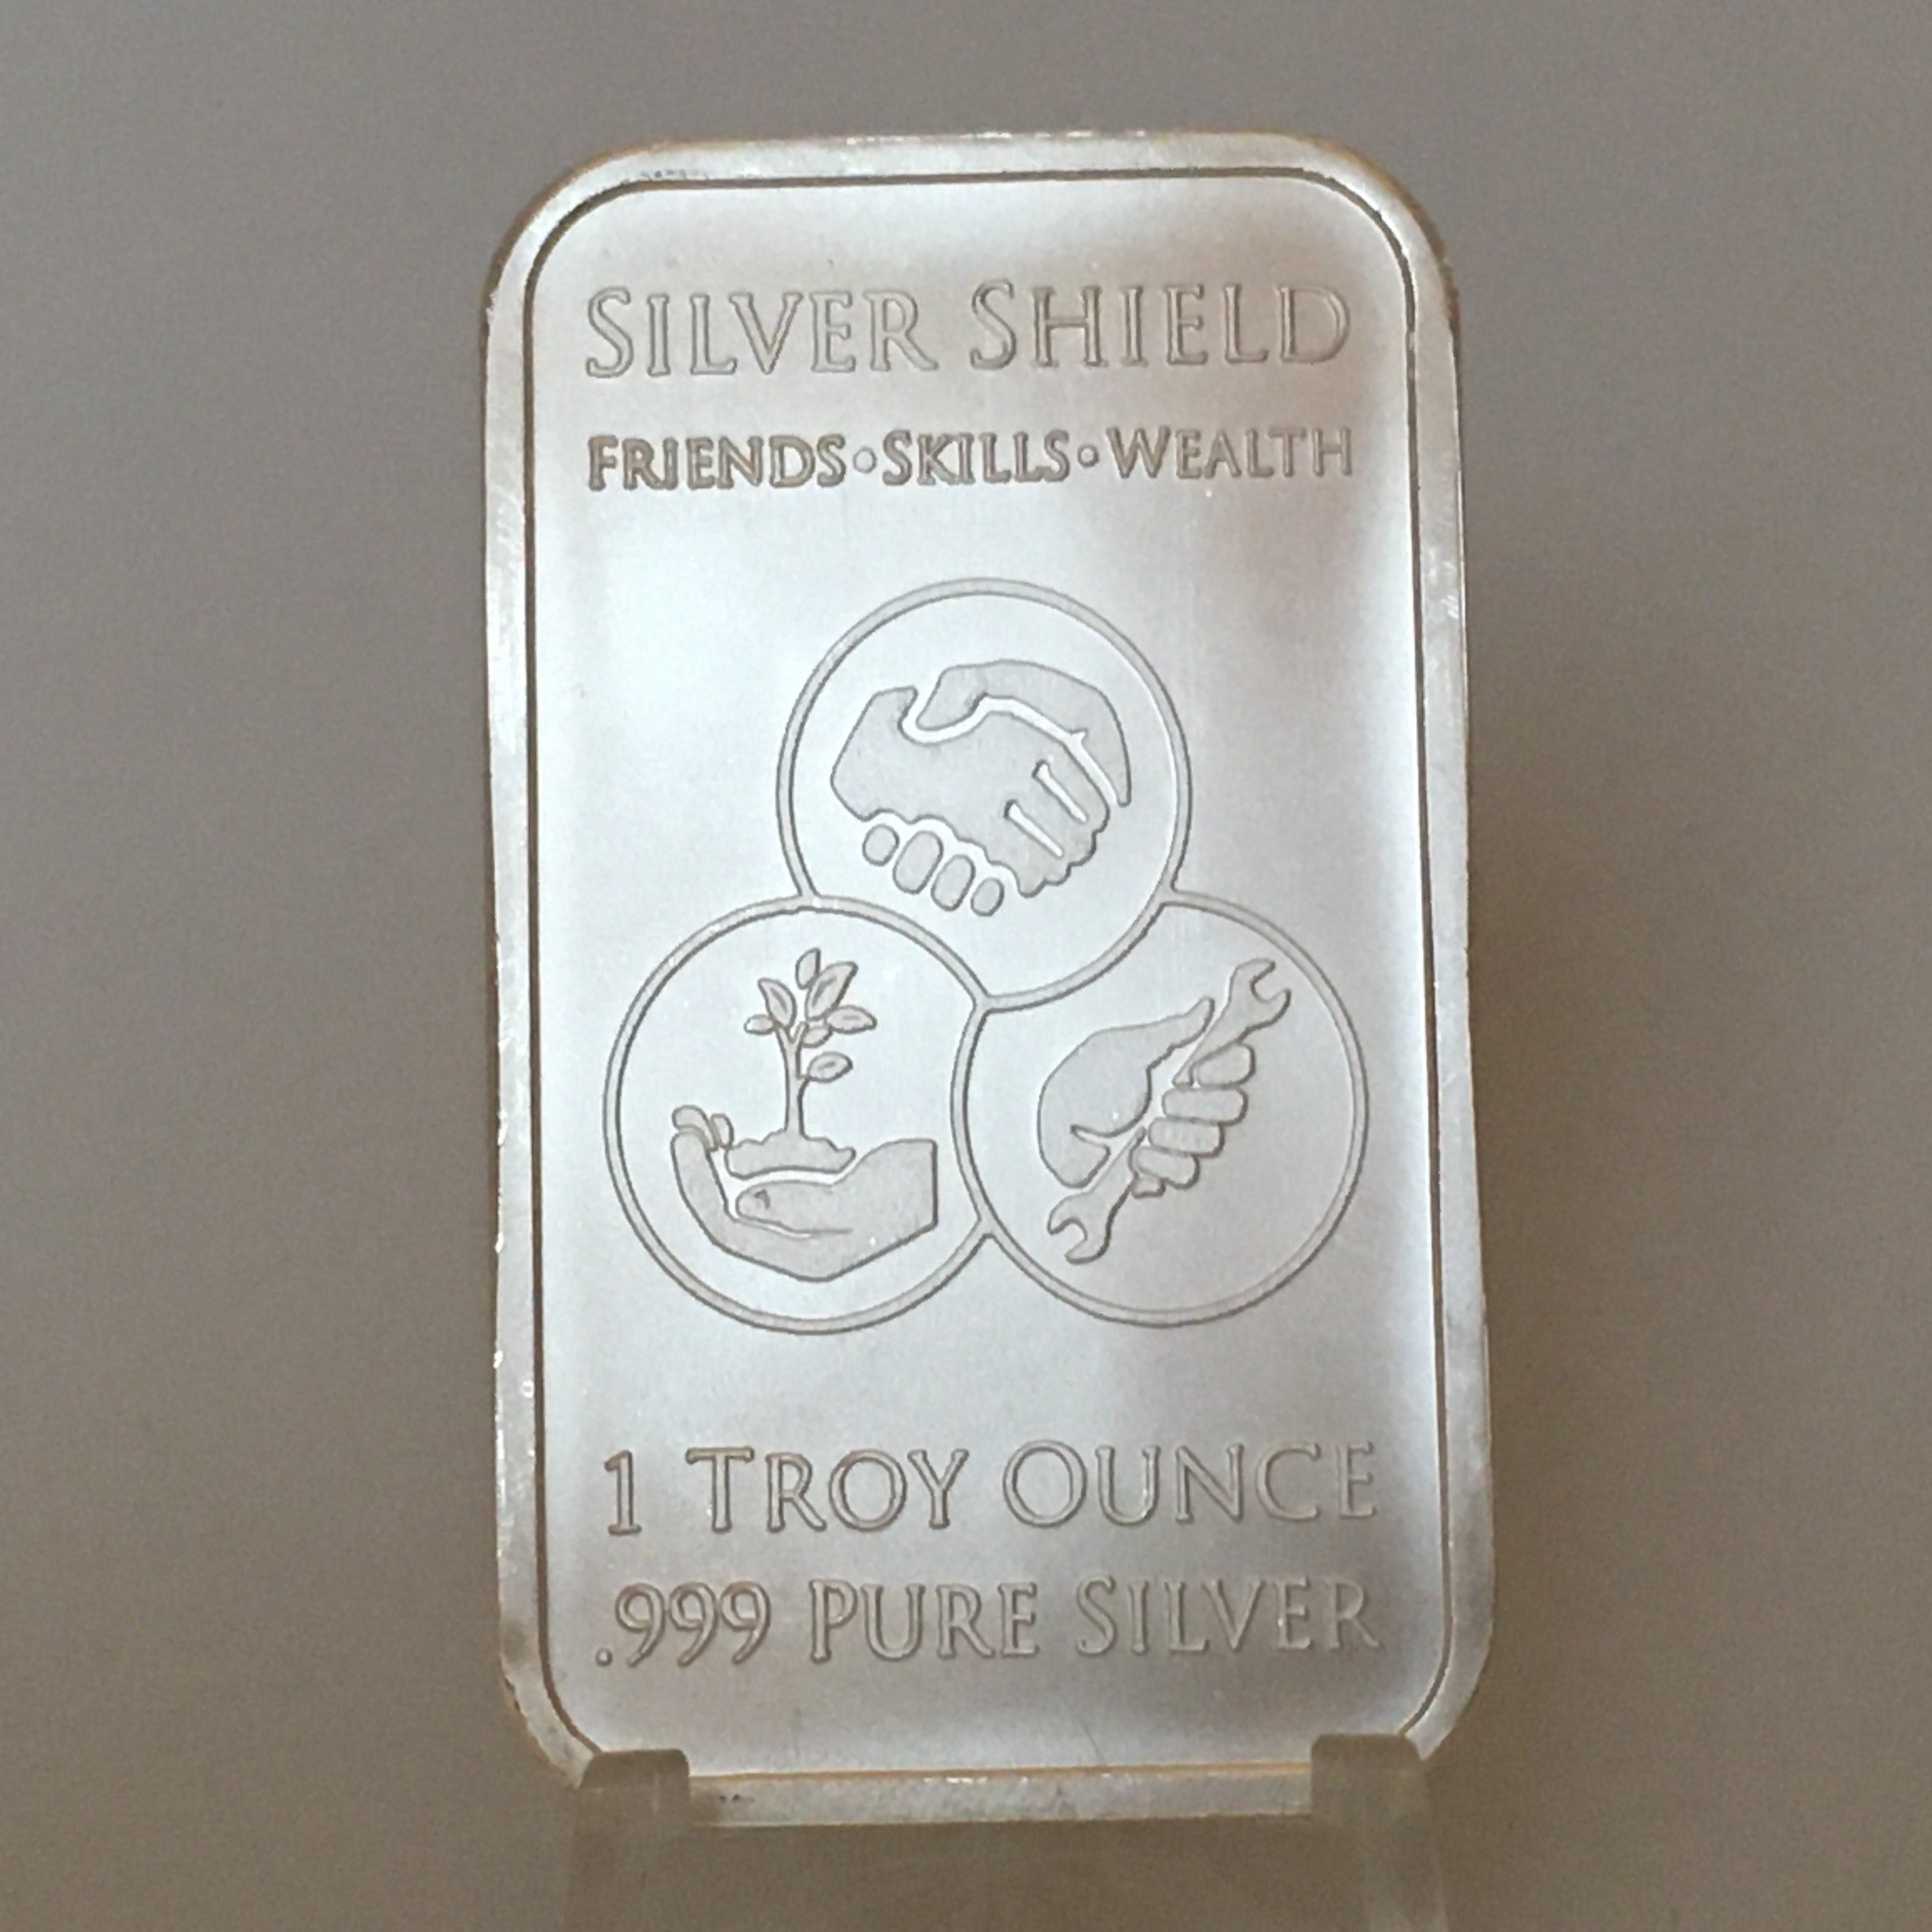 No Lie Gets to the Other Side by Silver Shield, BU 1 oz .999